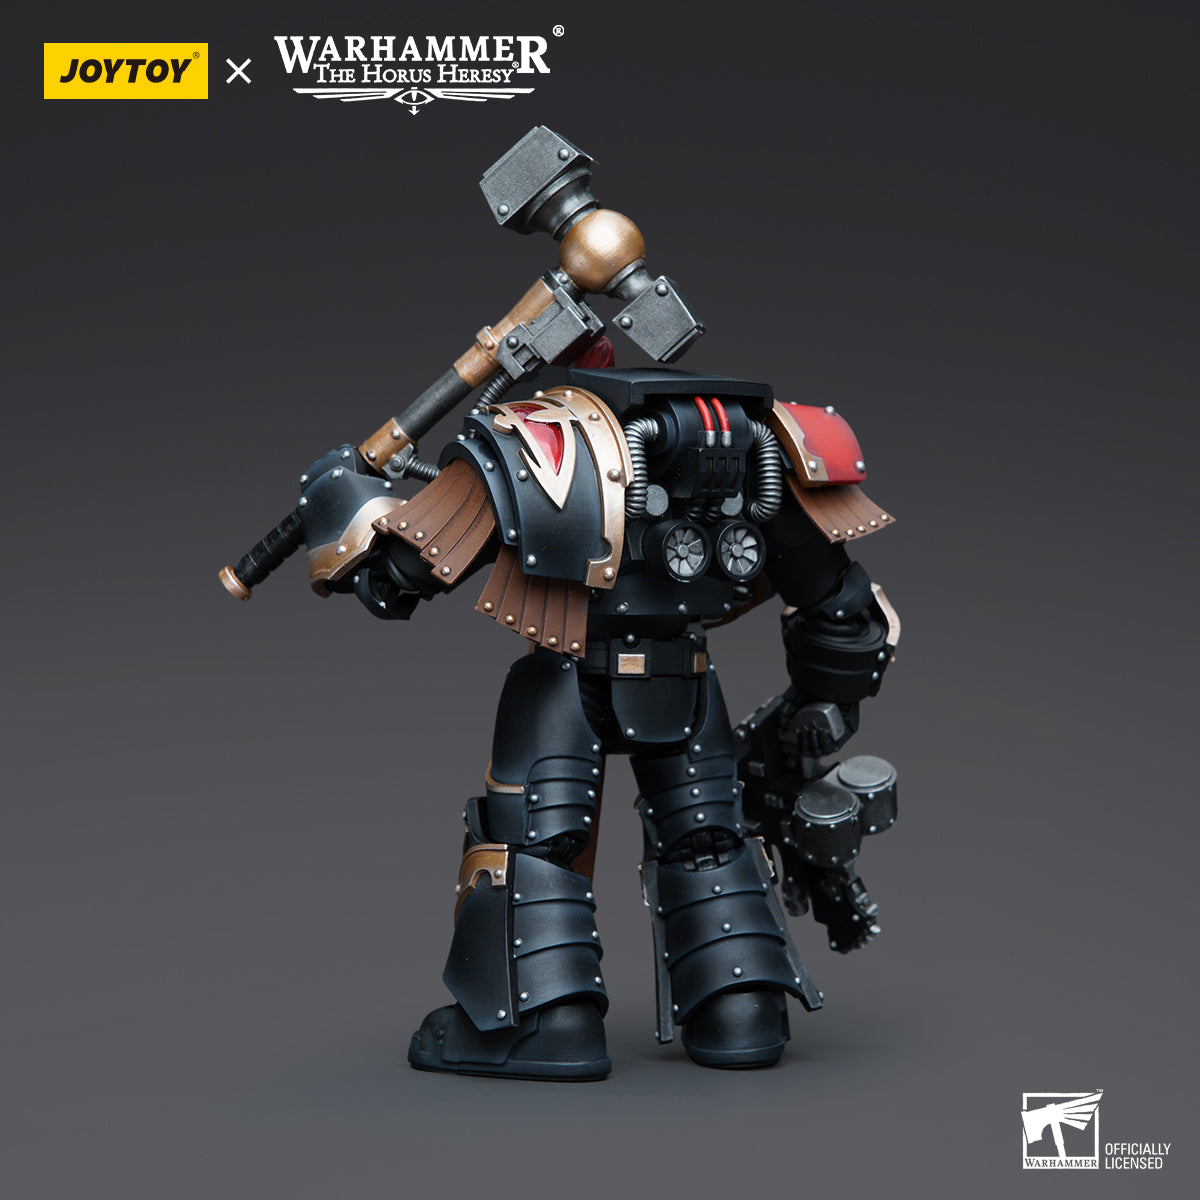 Warhammer Collectibles: 1/18 Scale Sons of Horus Justaerin Terminator Squad Justaerin Thundr Hammer (Preorder)